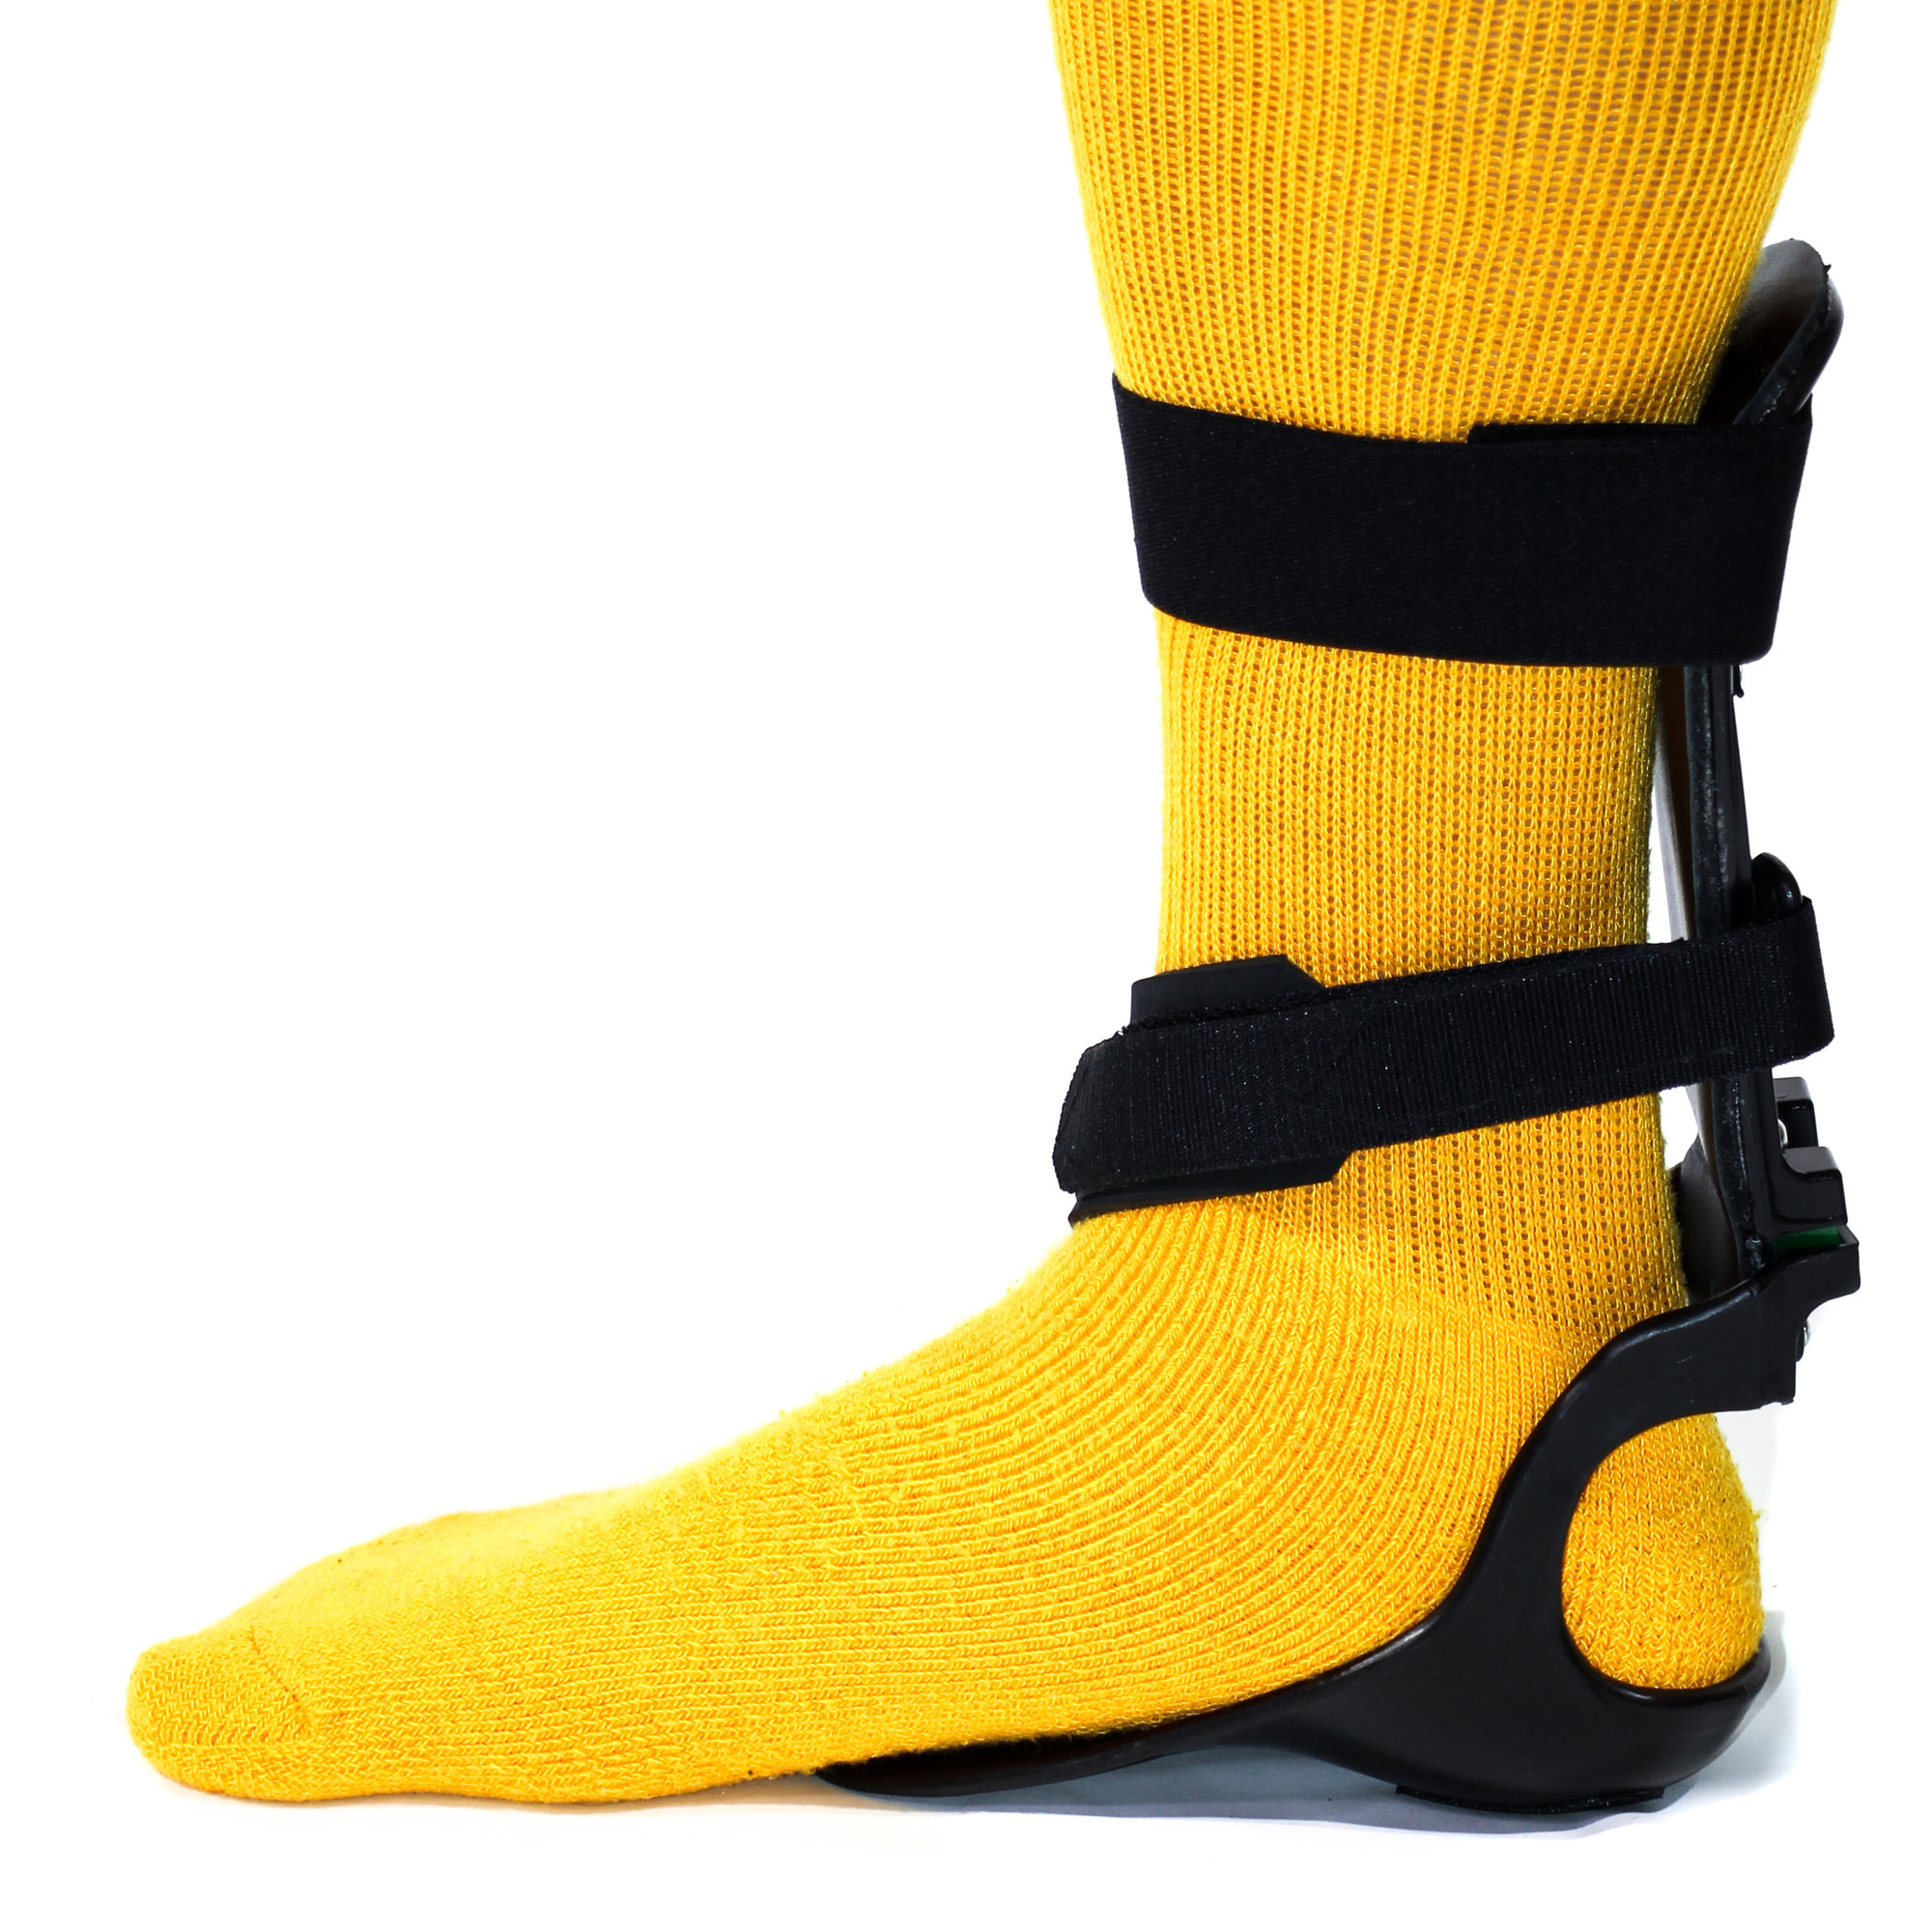 Insightful Products Step-Smart Drop Foot Brace, AFO (Right Foot, Large/X-Large) - image 1 of 5